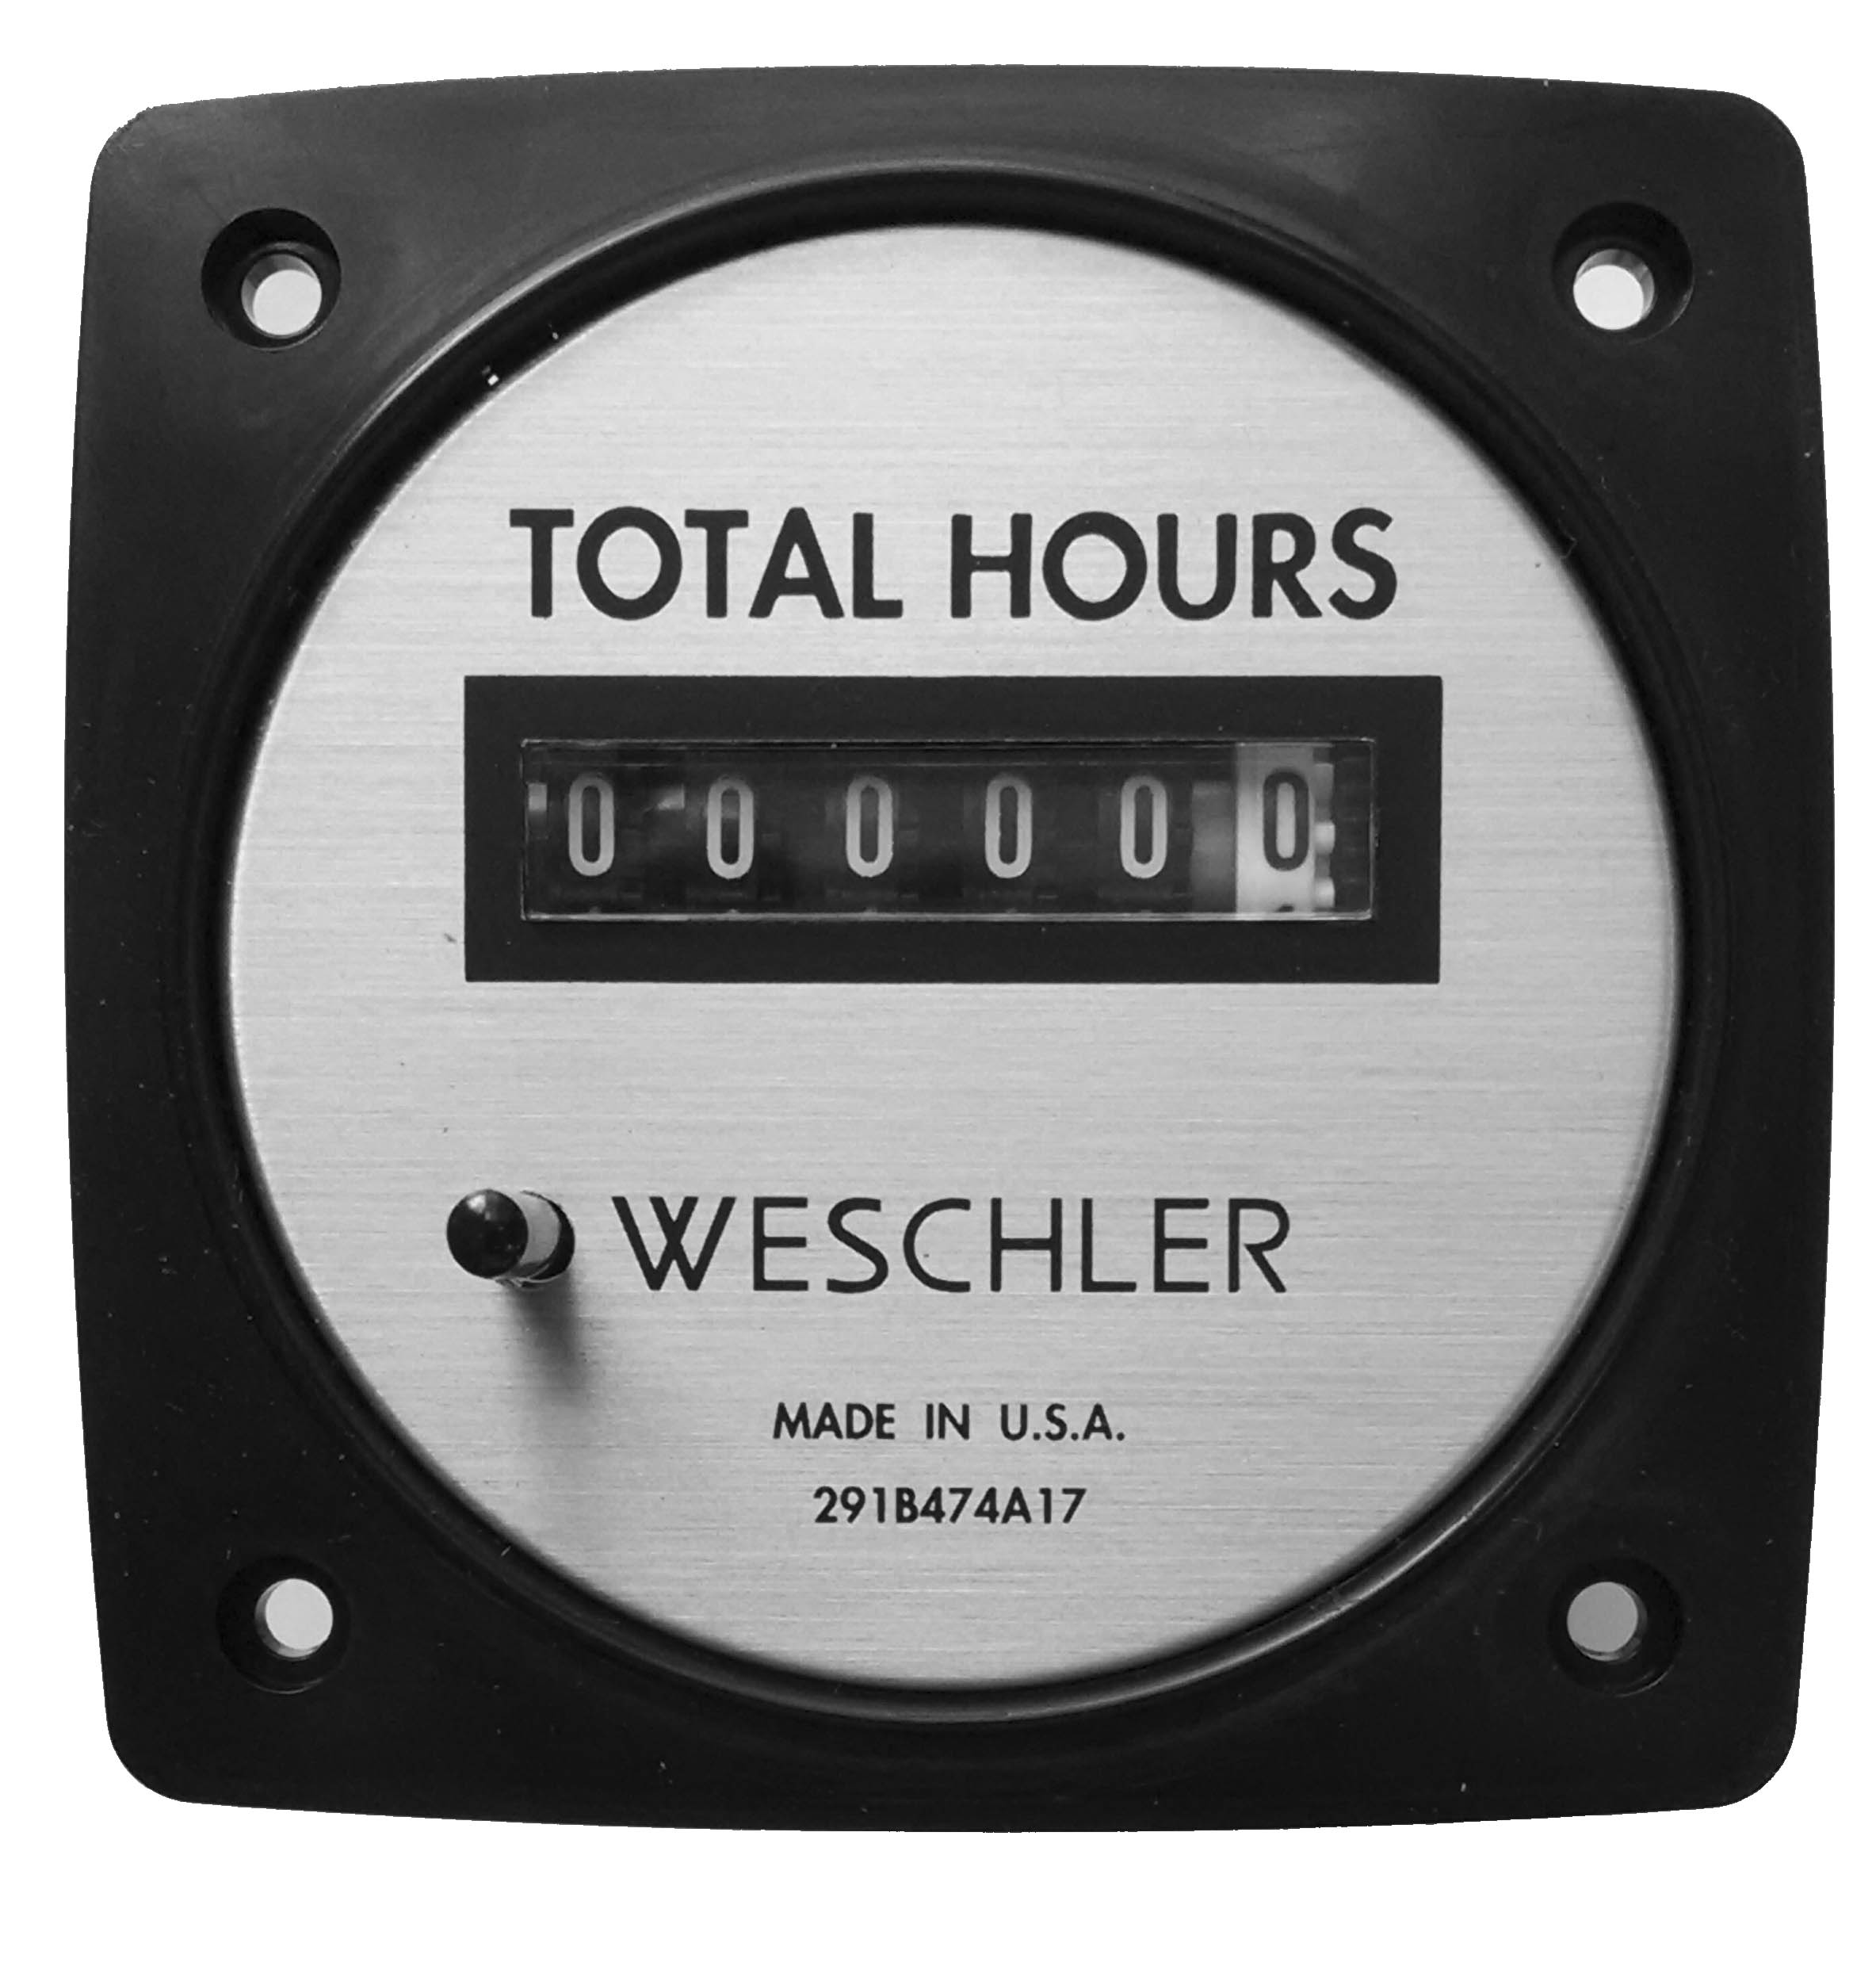 ENM CO. ELAPSED TIME METER / HOUR METER ALL METAL 120VAC 60HZ HIGH-QUALITY 